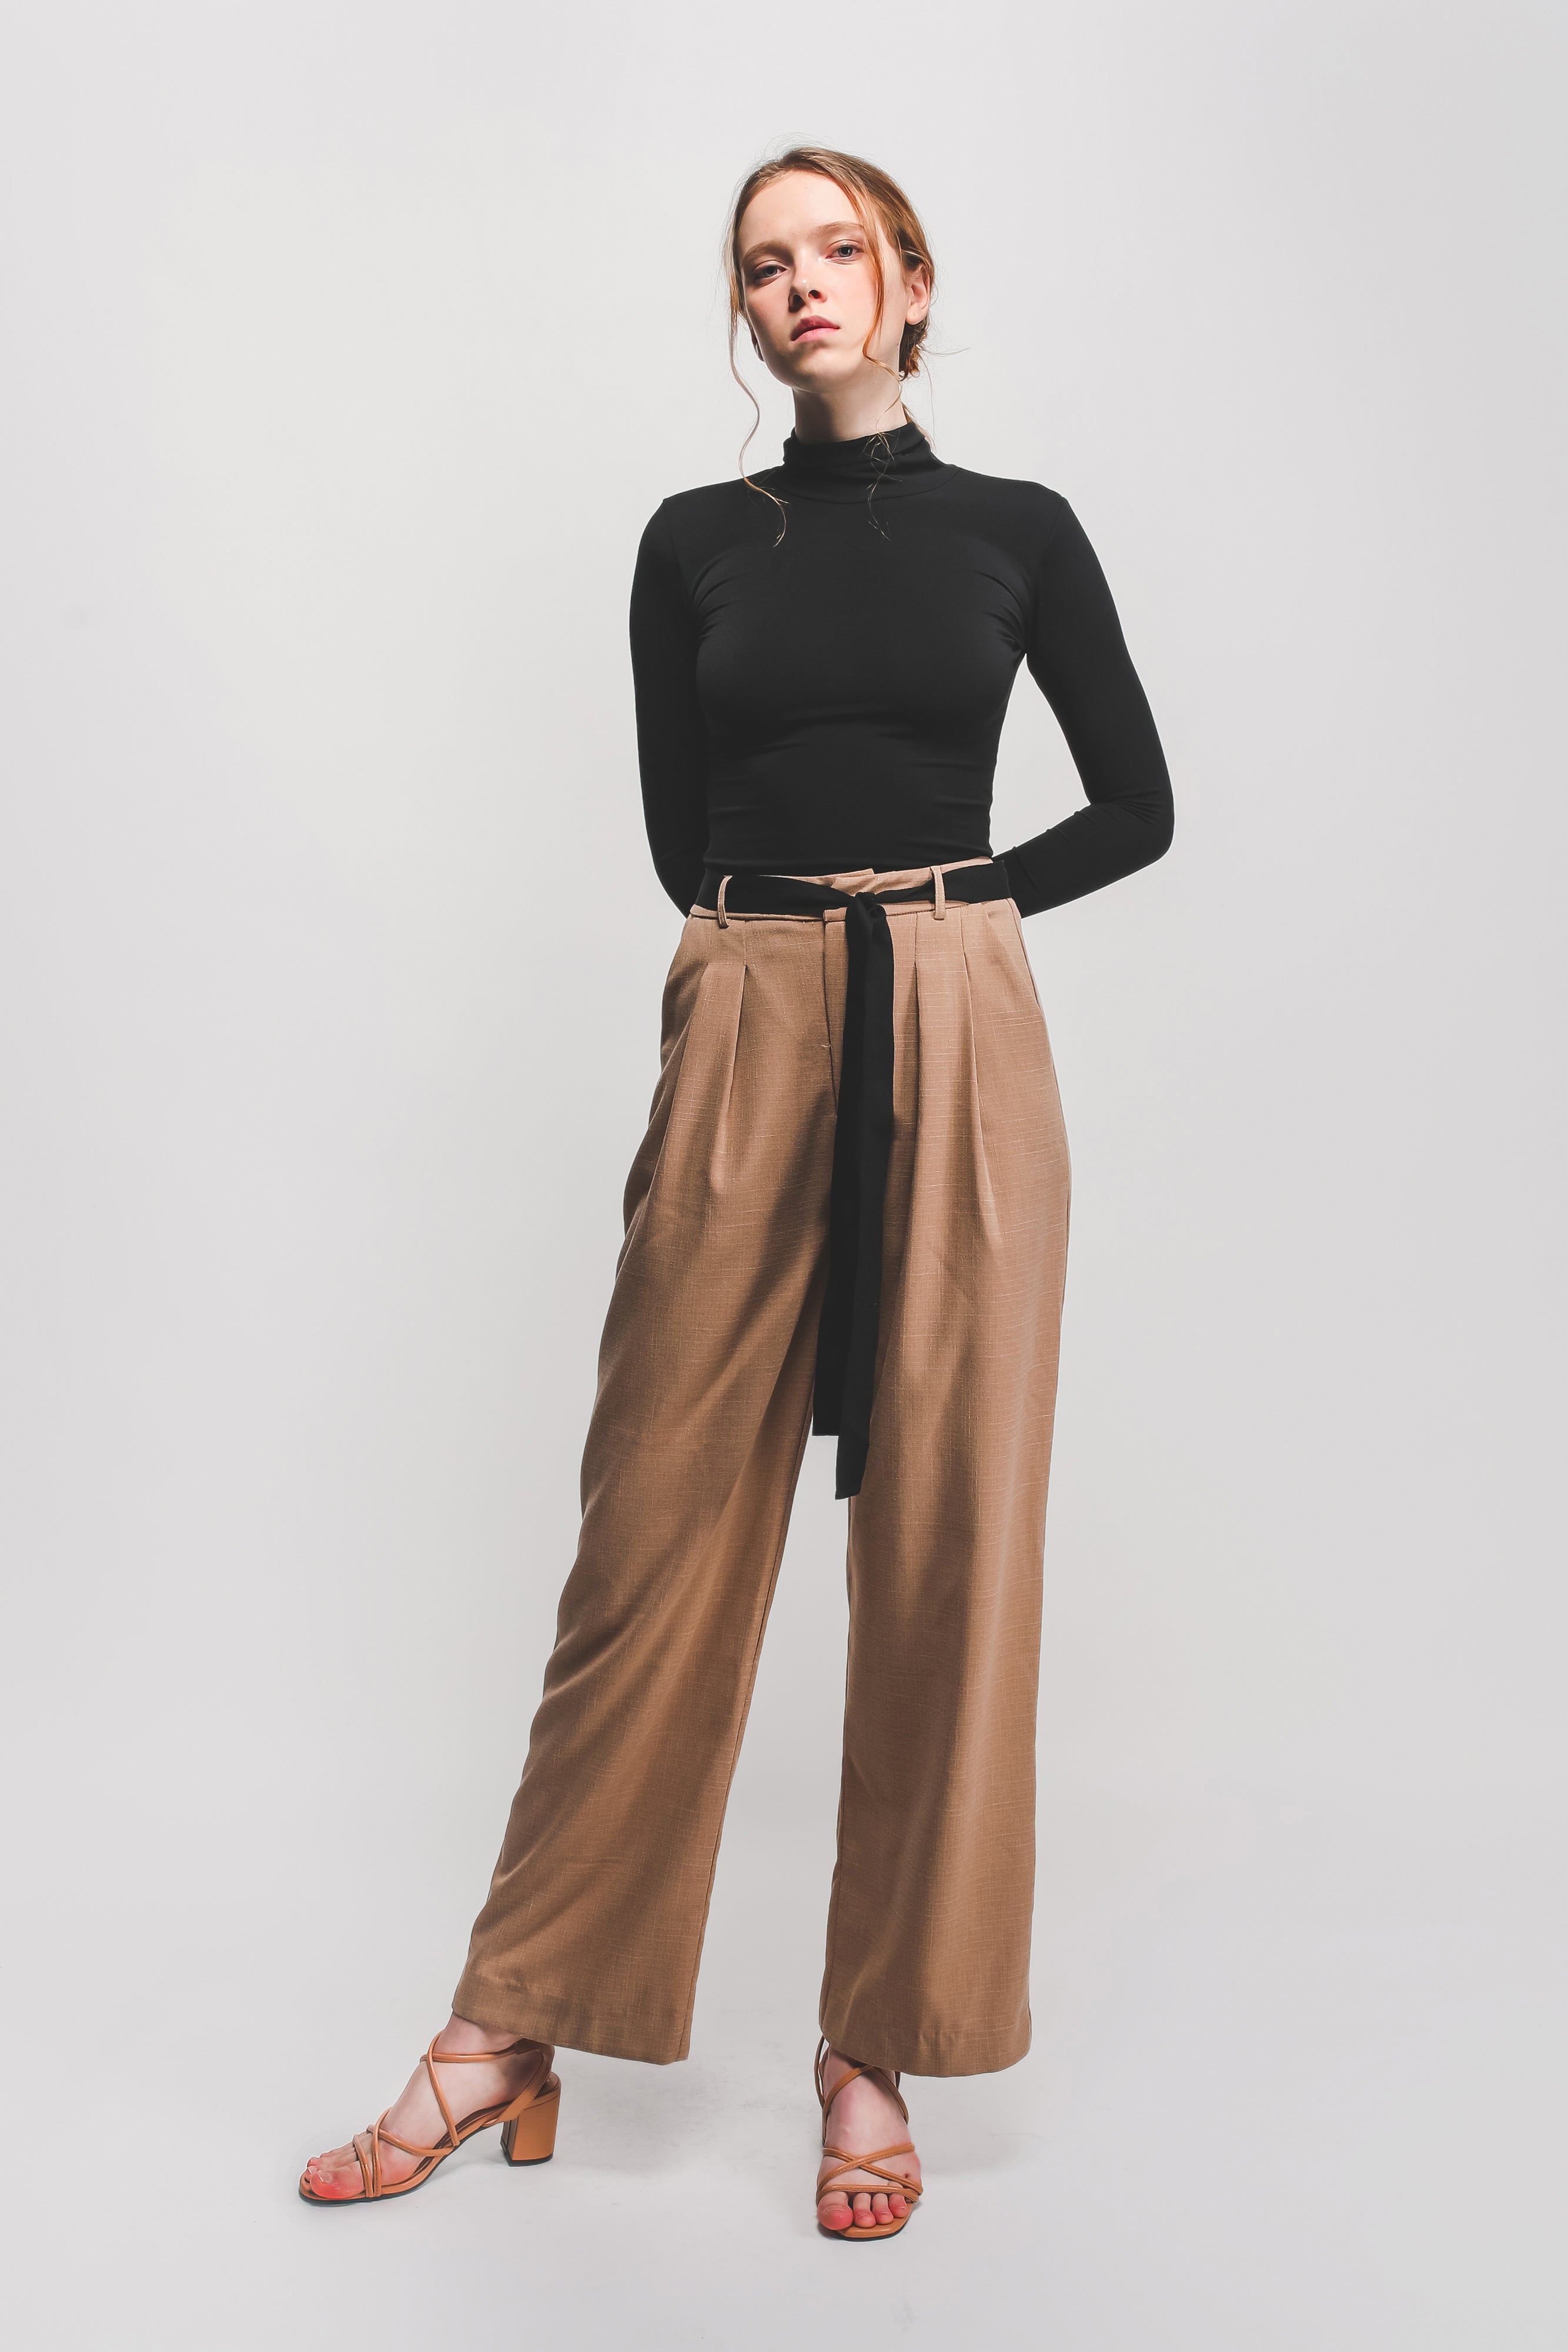 Textured Wide Legged Pants W Contrasting Sash In Camel